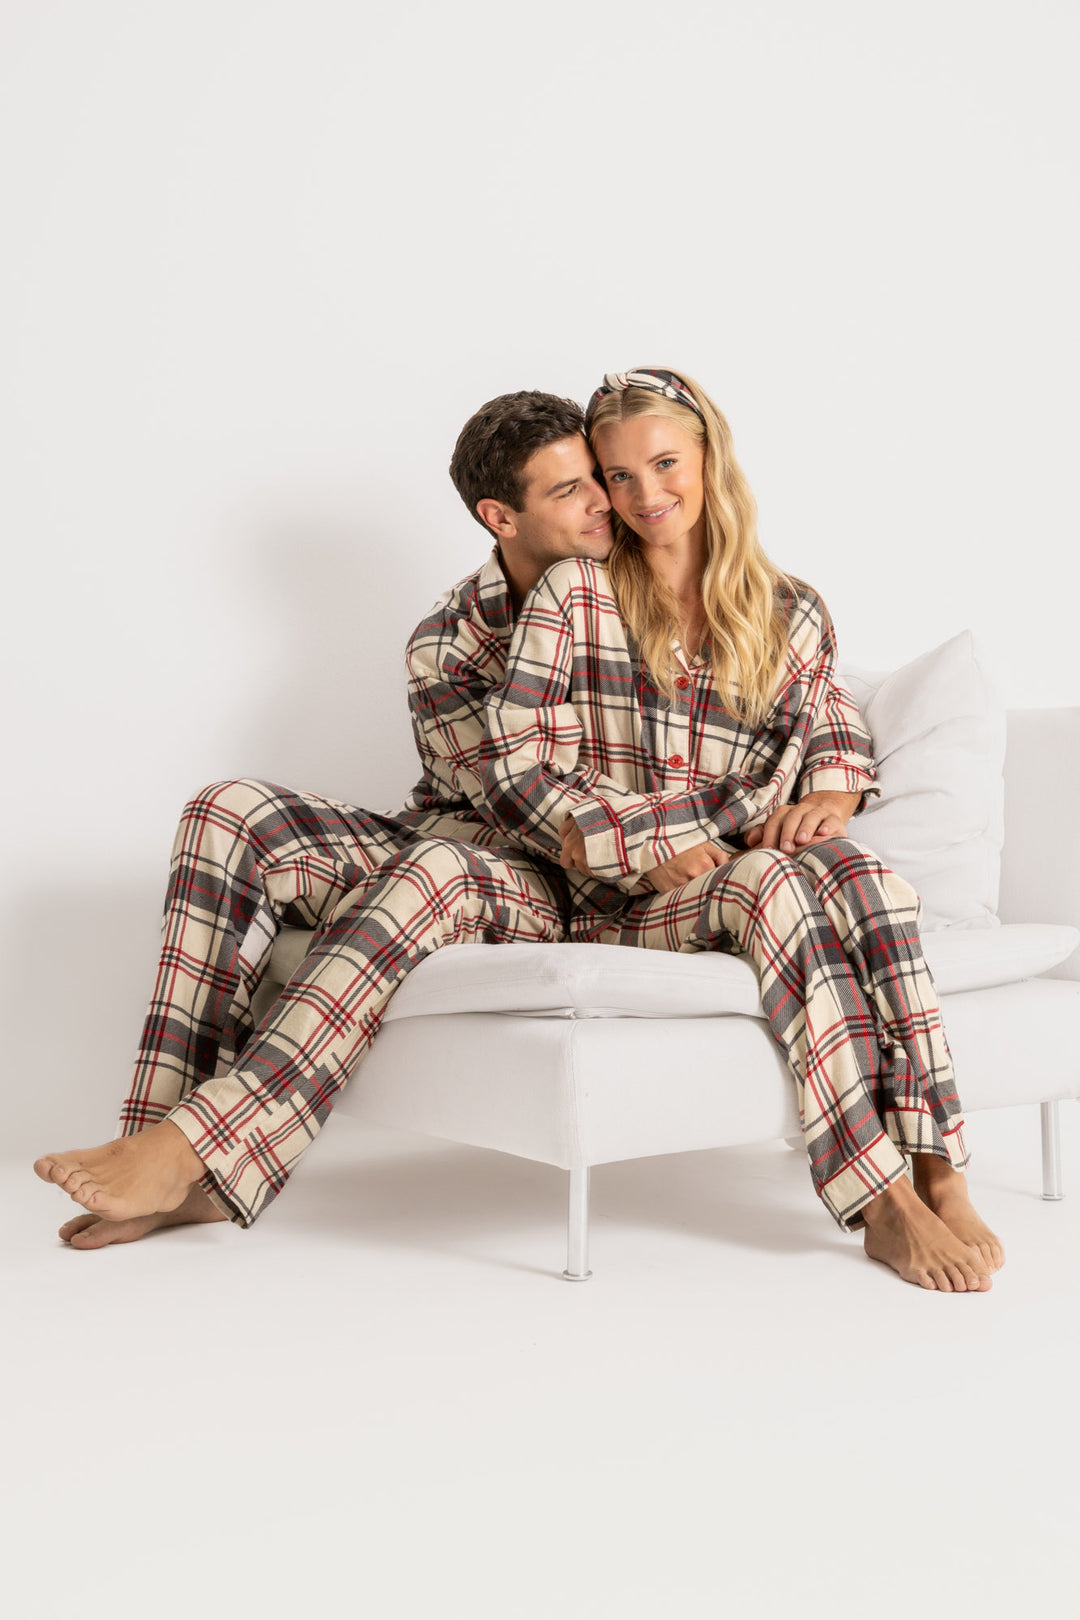 Women's cotton flannel pajama set in tan-red-grey plaid. Button top & tie-waist pj pant, relaxed fit. (7257679233124)